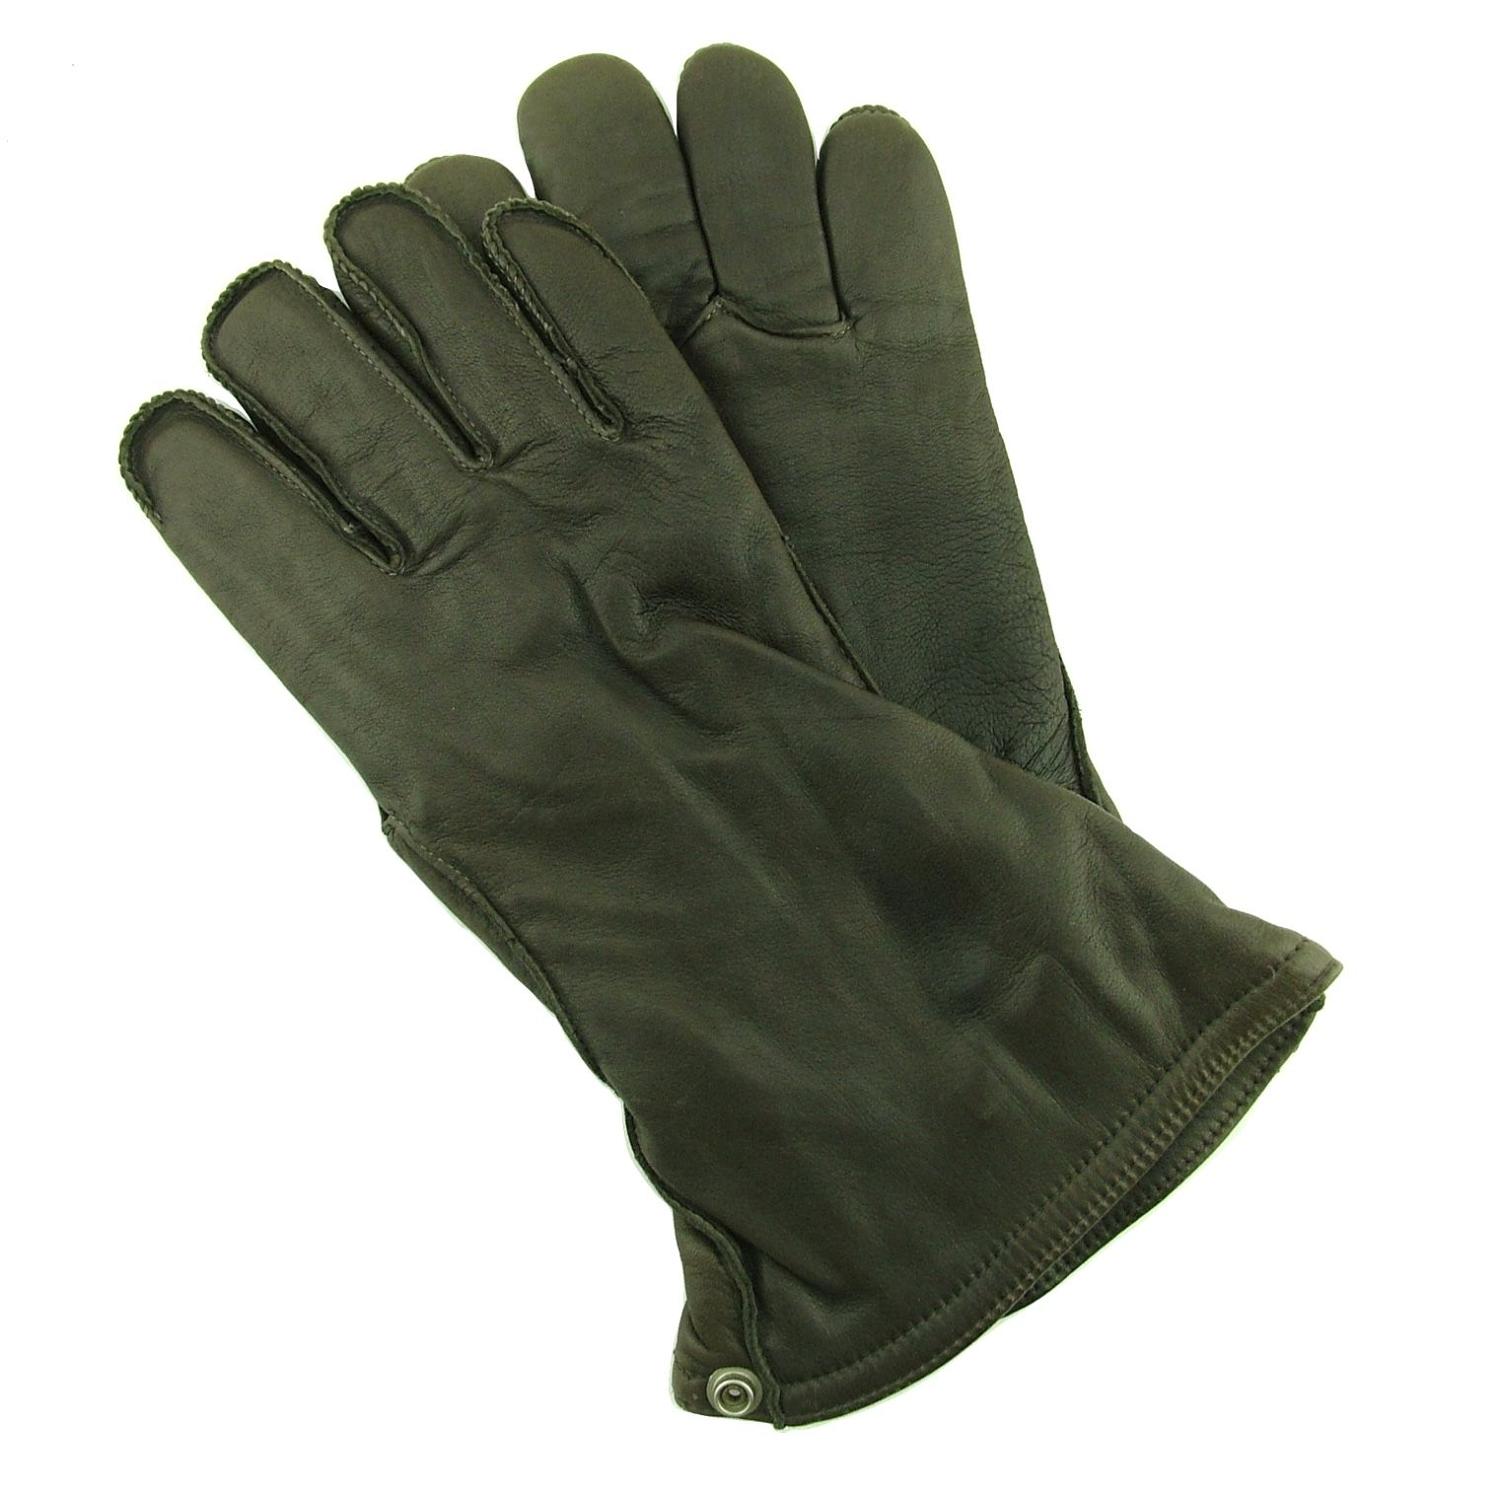 USAAF electrically heated flying gloves